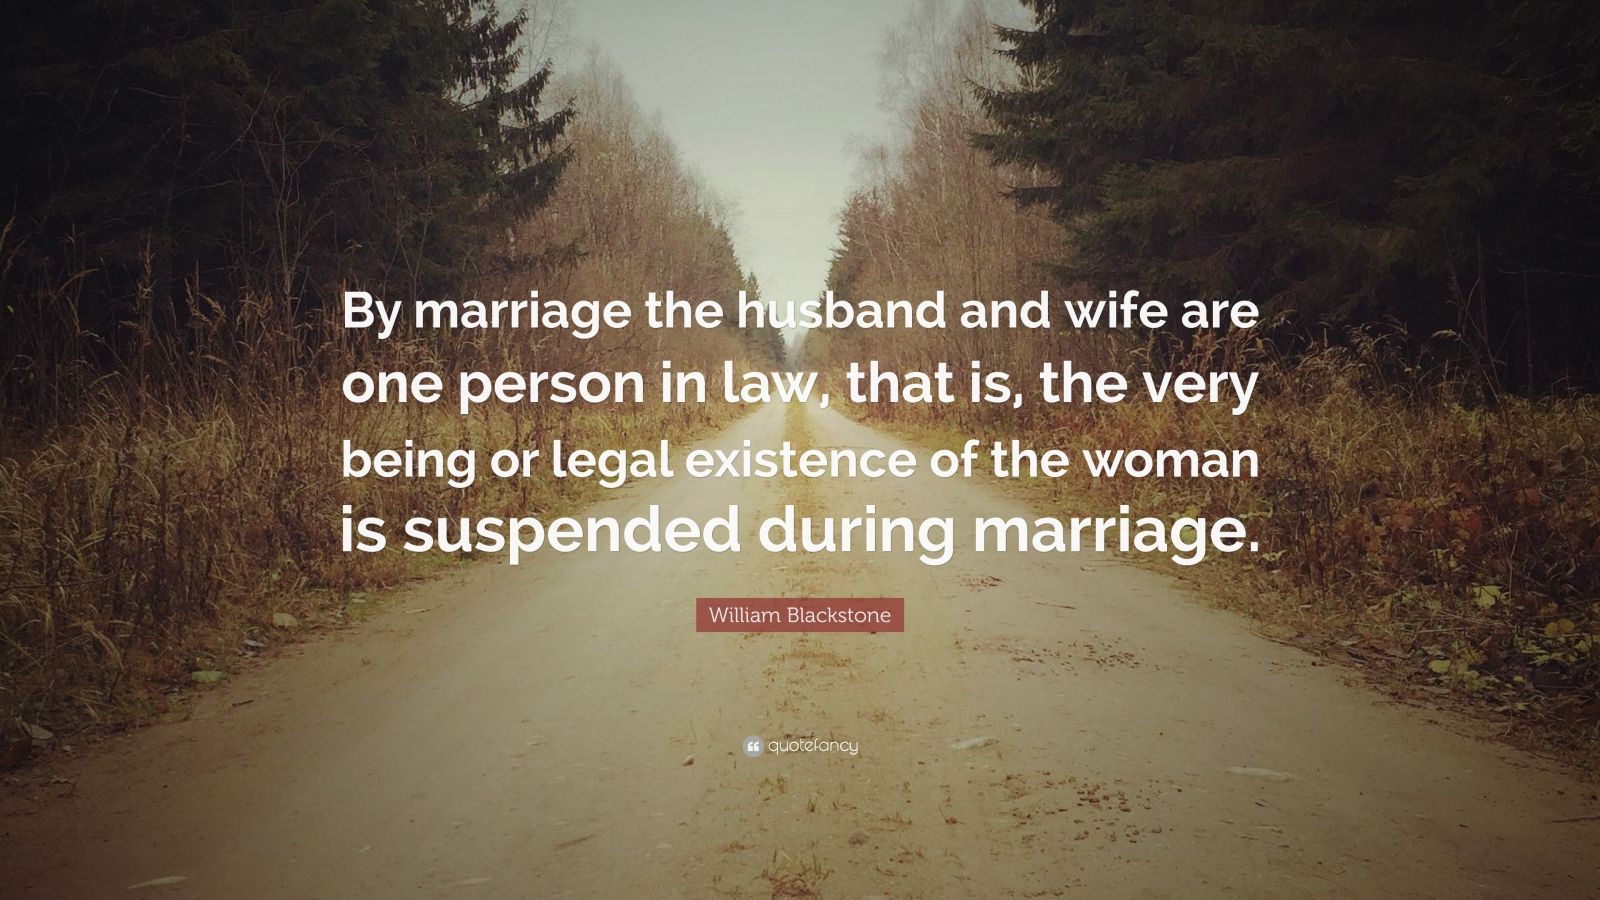 William Blackstone Quote: "By marriage the husband and ...